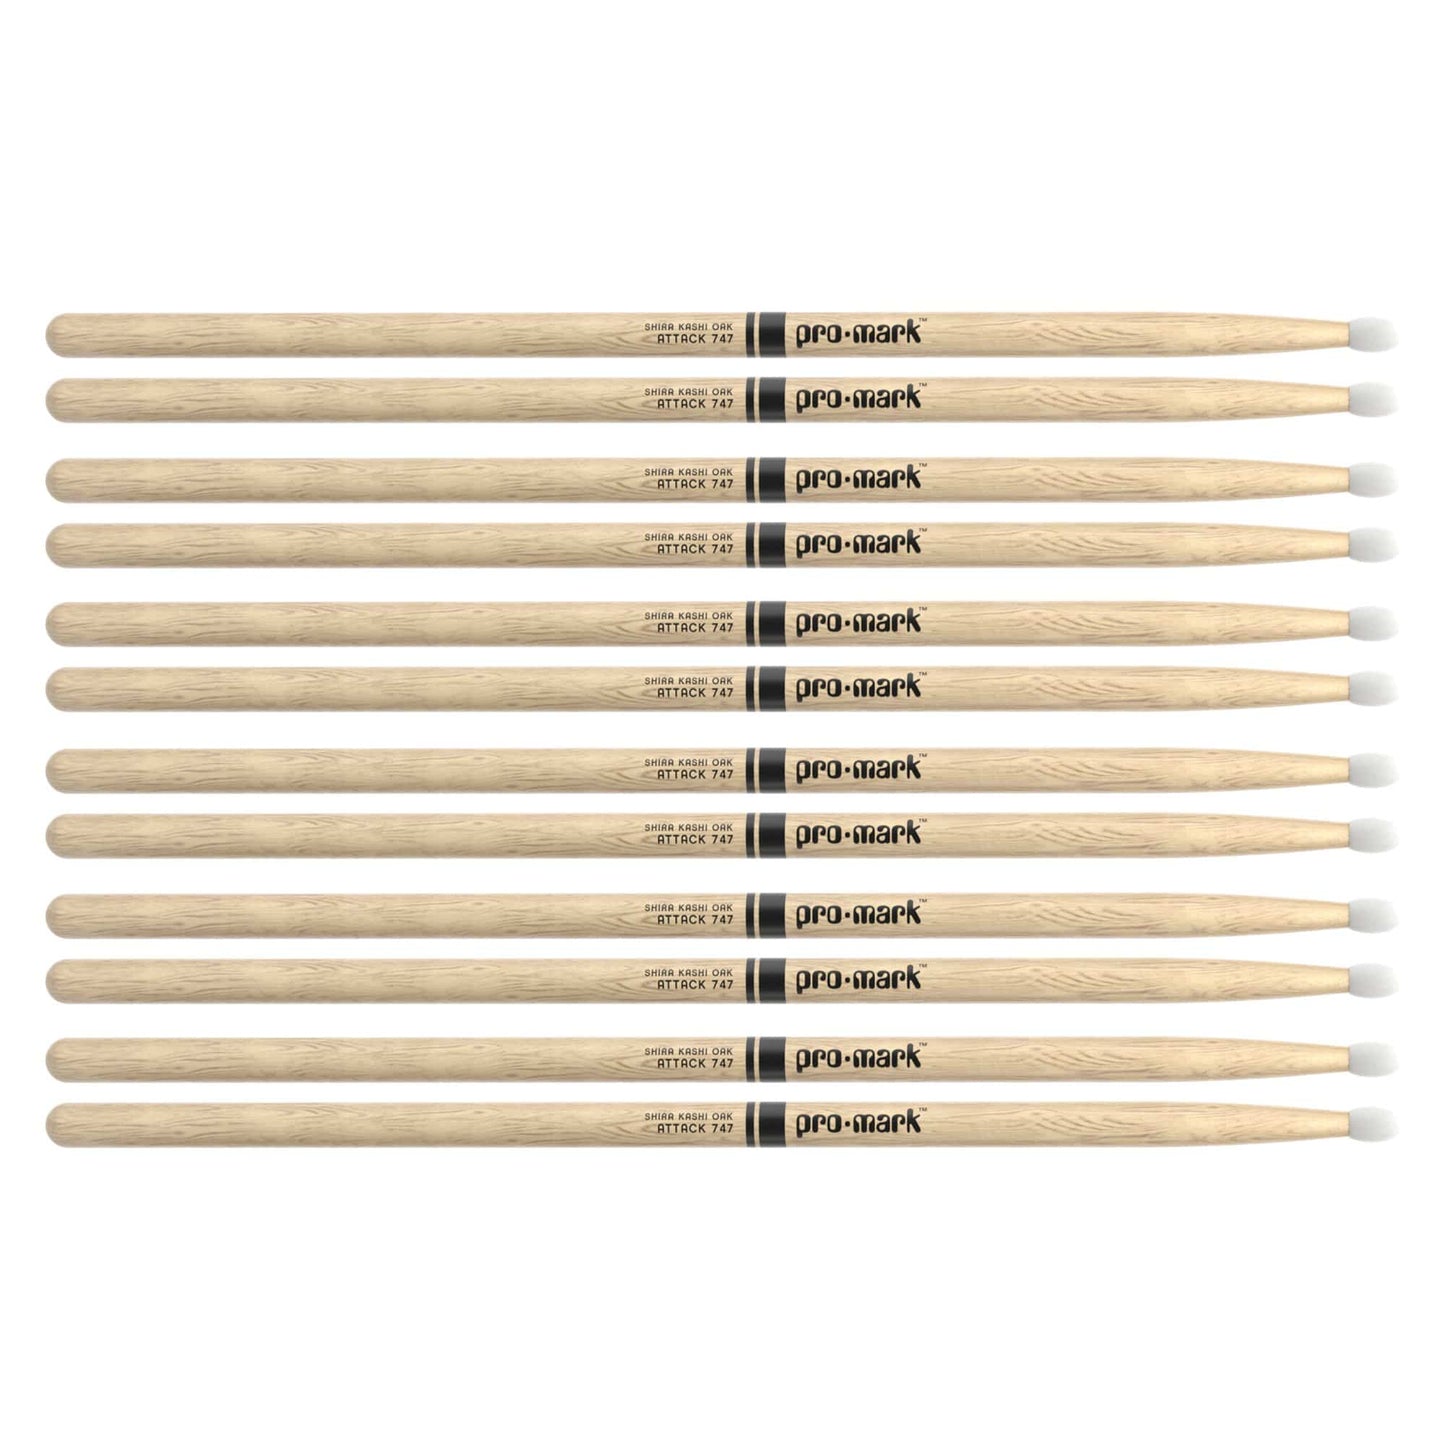 Promark Shira Kashi Oak 747 Nylon Tip Drum Sticks (6 Pair Bundle) Drums and Percussion / Parts and Accessories / Drum Sticks and Mallets